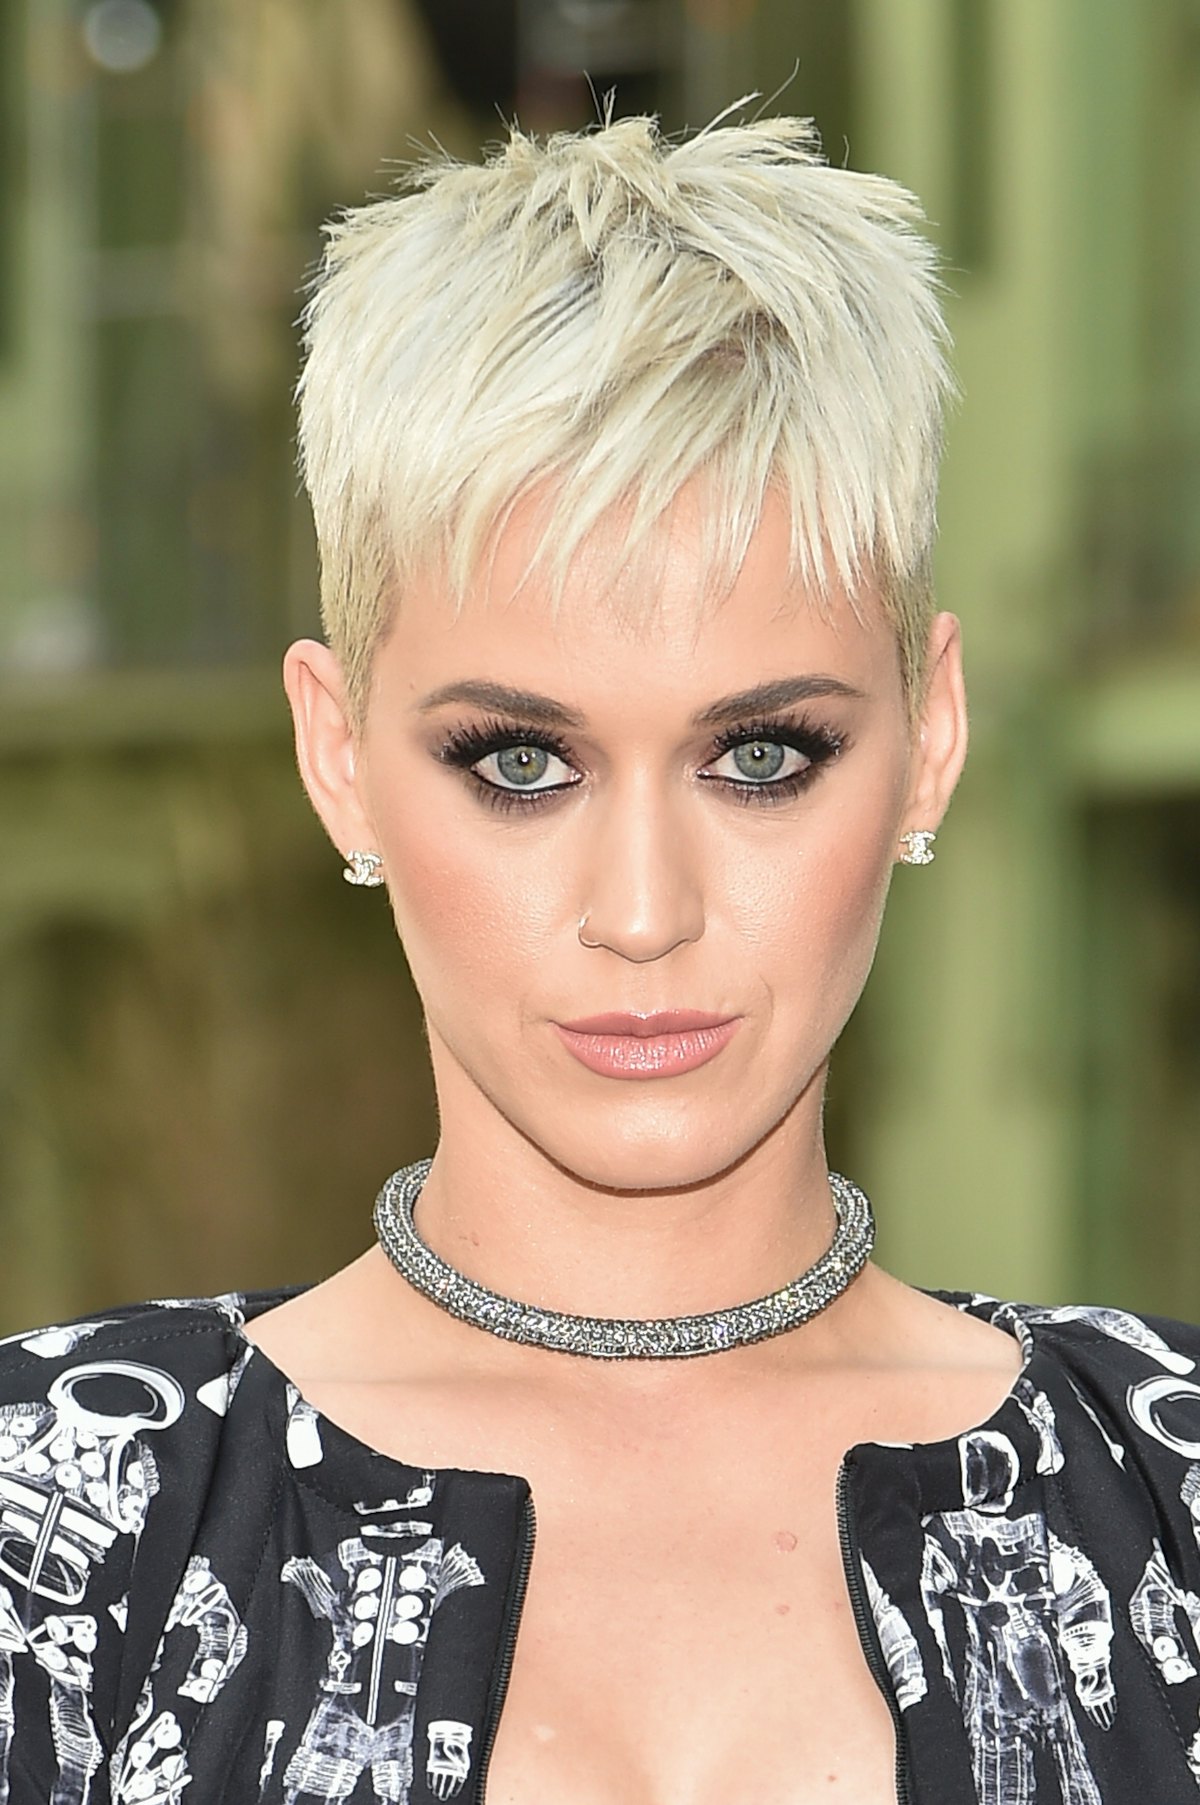 28 Of The Most Iconic Pixie Cuts From Rihanna To Twiggy